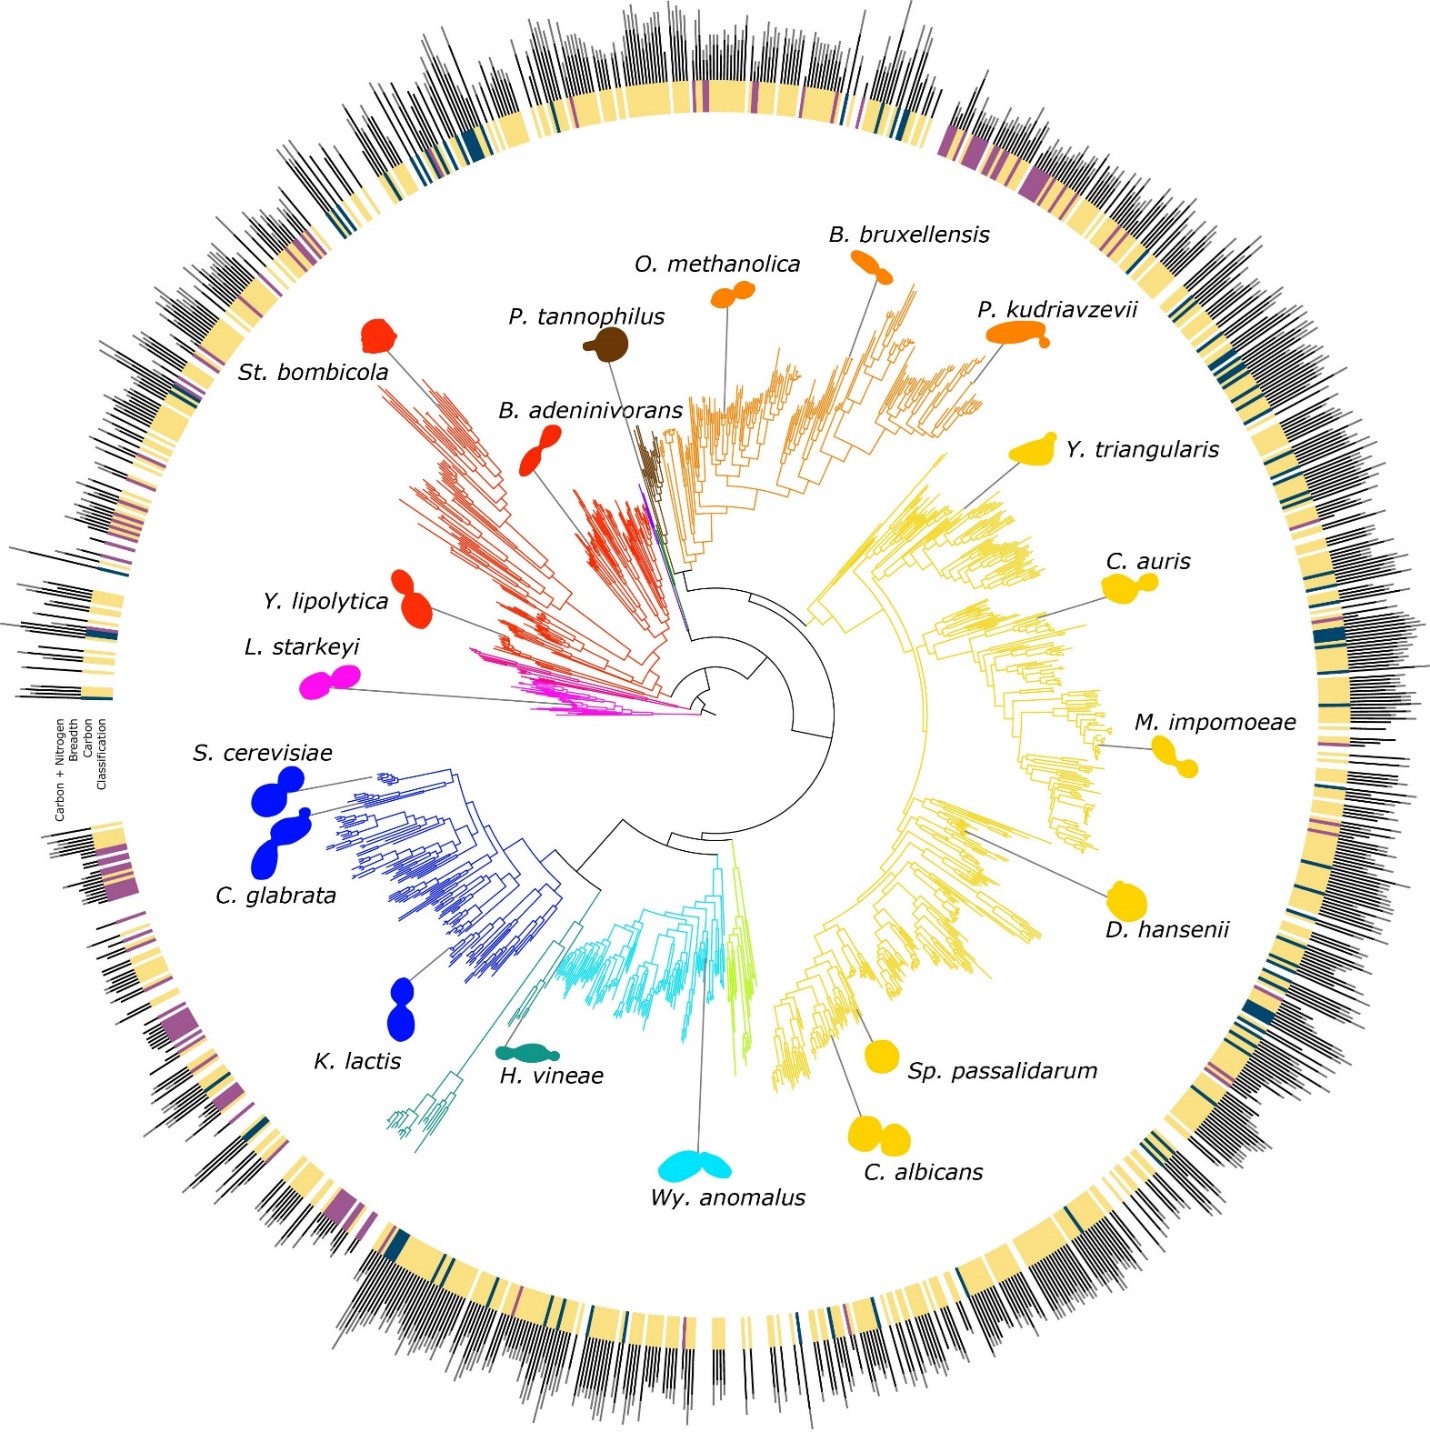 A circular phylogeny of yeasts in a rainbow of colors